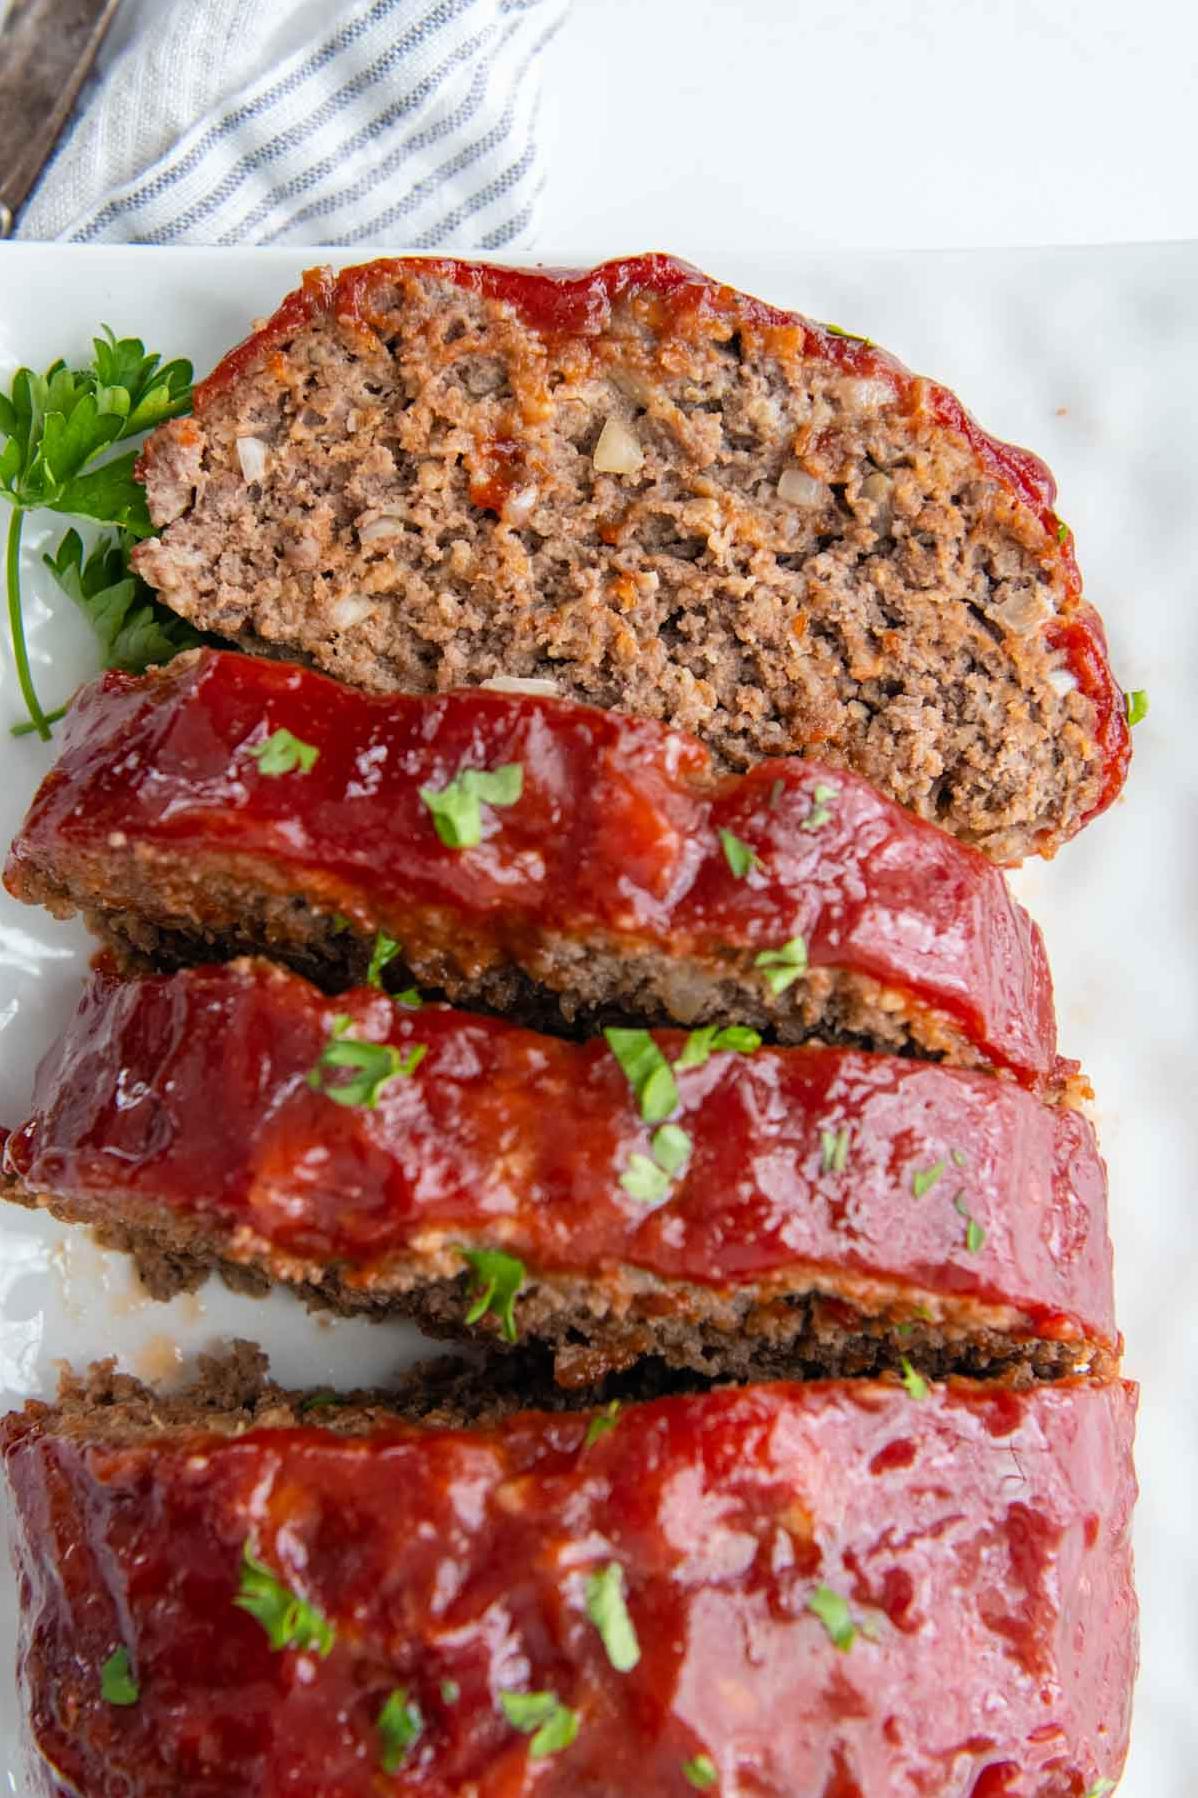  Who needs breadcrumbs? Not these gluten-free meatloaves!